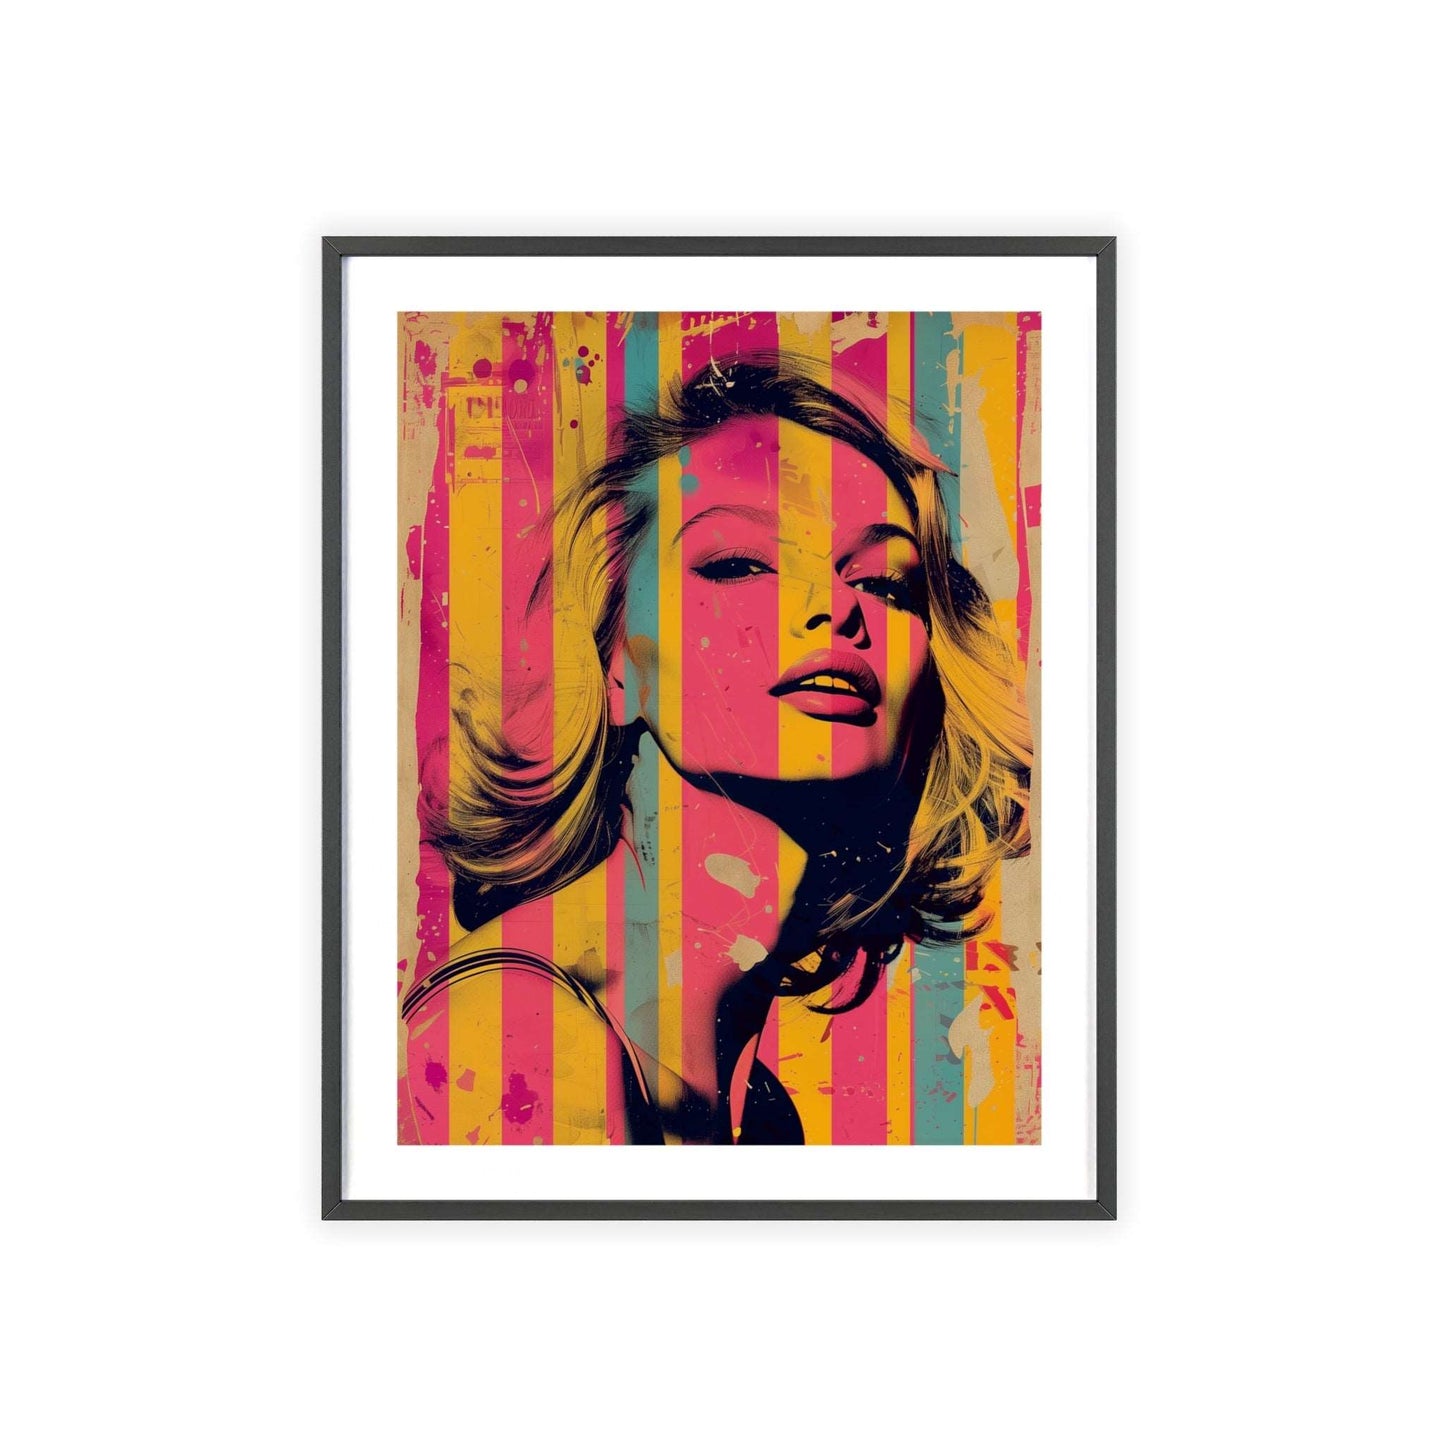 Pop art portrait of an iconic American woman from the Global Glamour collection, adding boldness and beauty to modern home decor